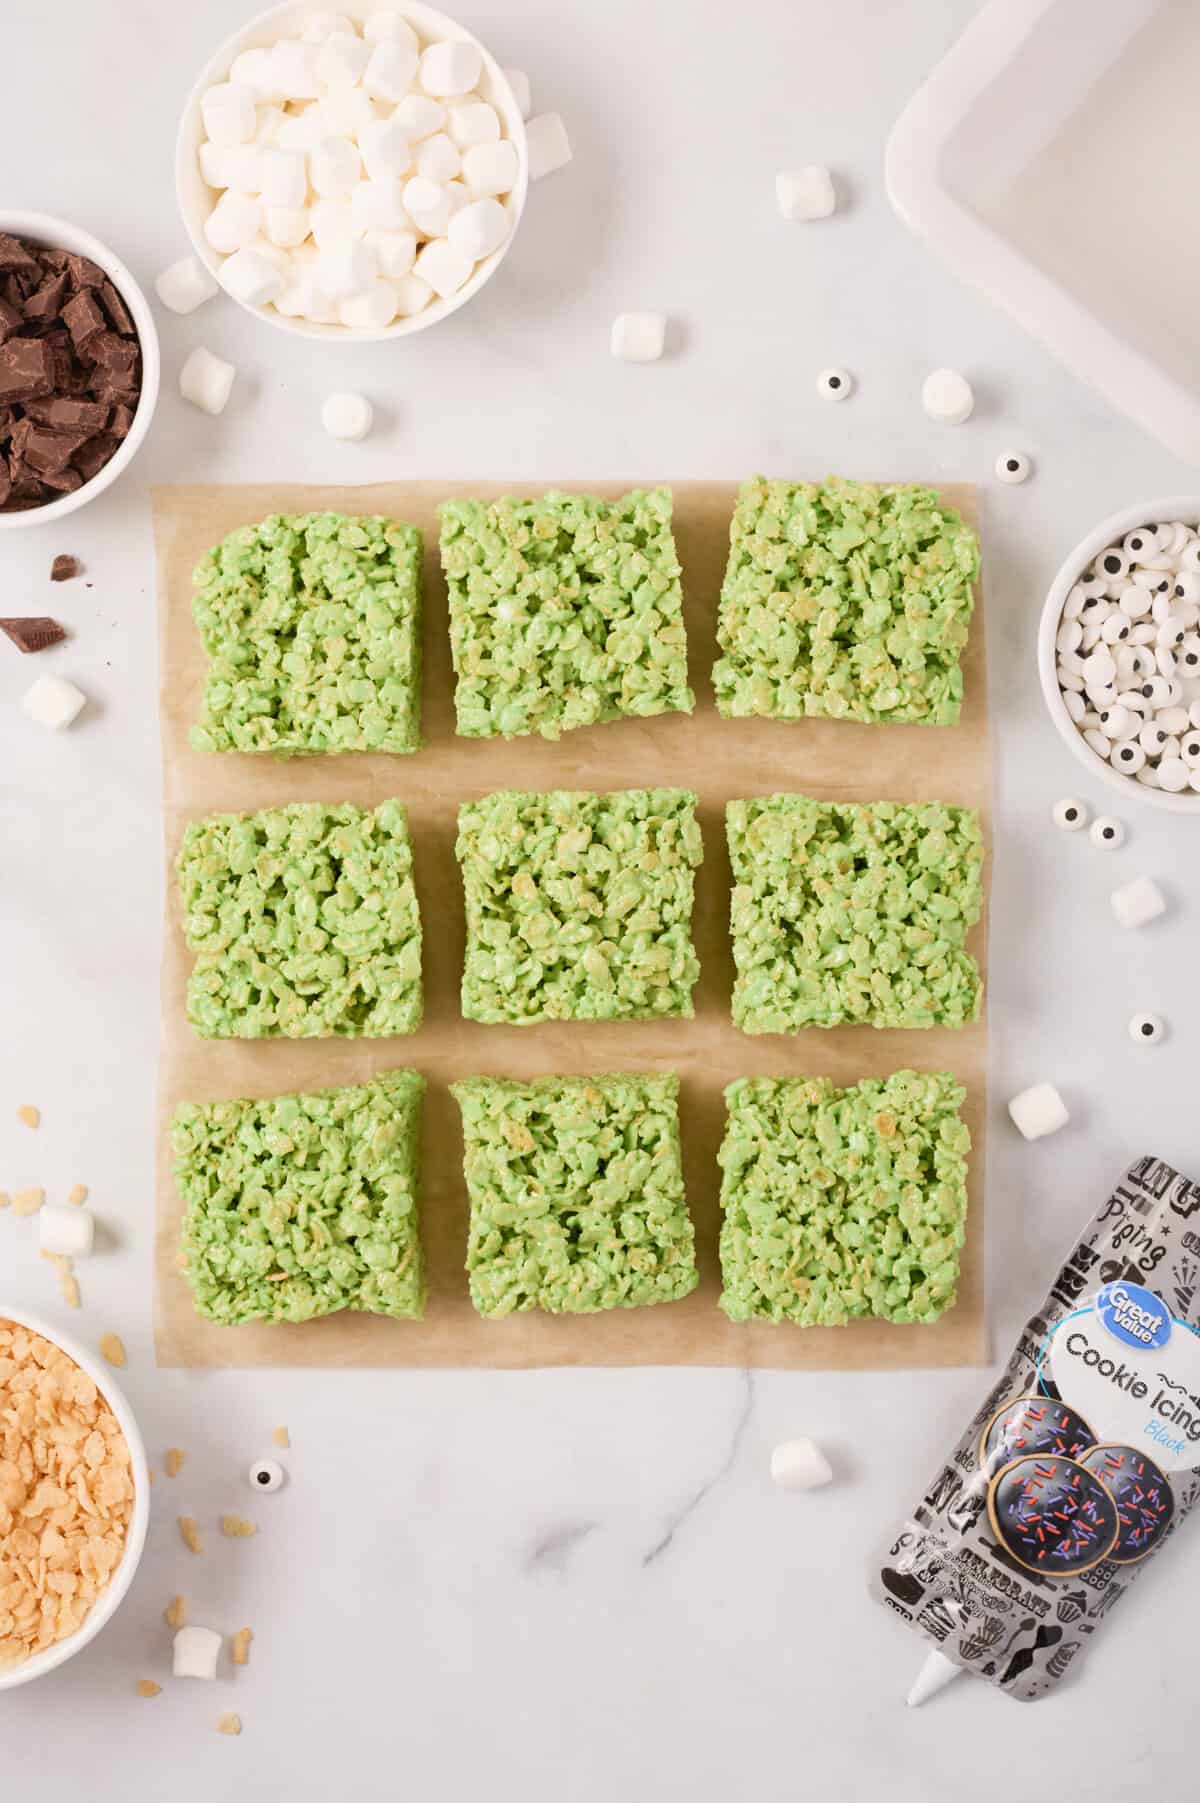 Green rice cereal treats cut into 9 equal squares.